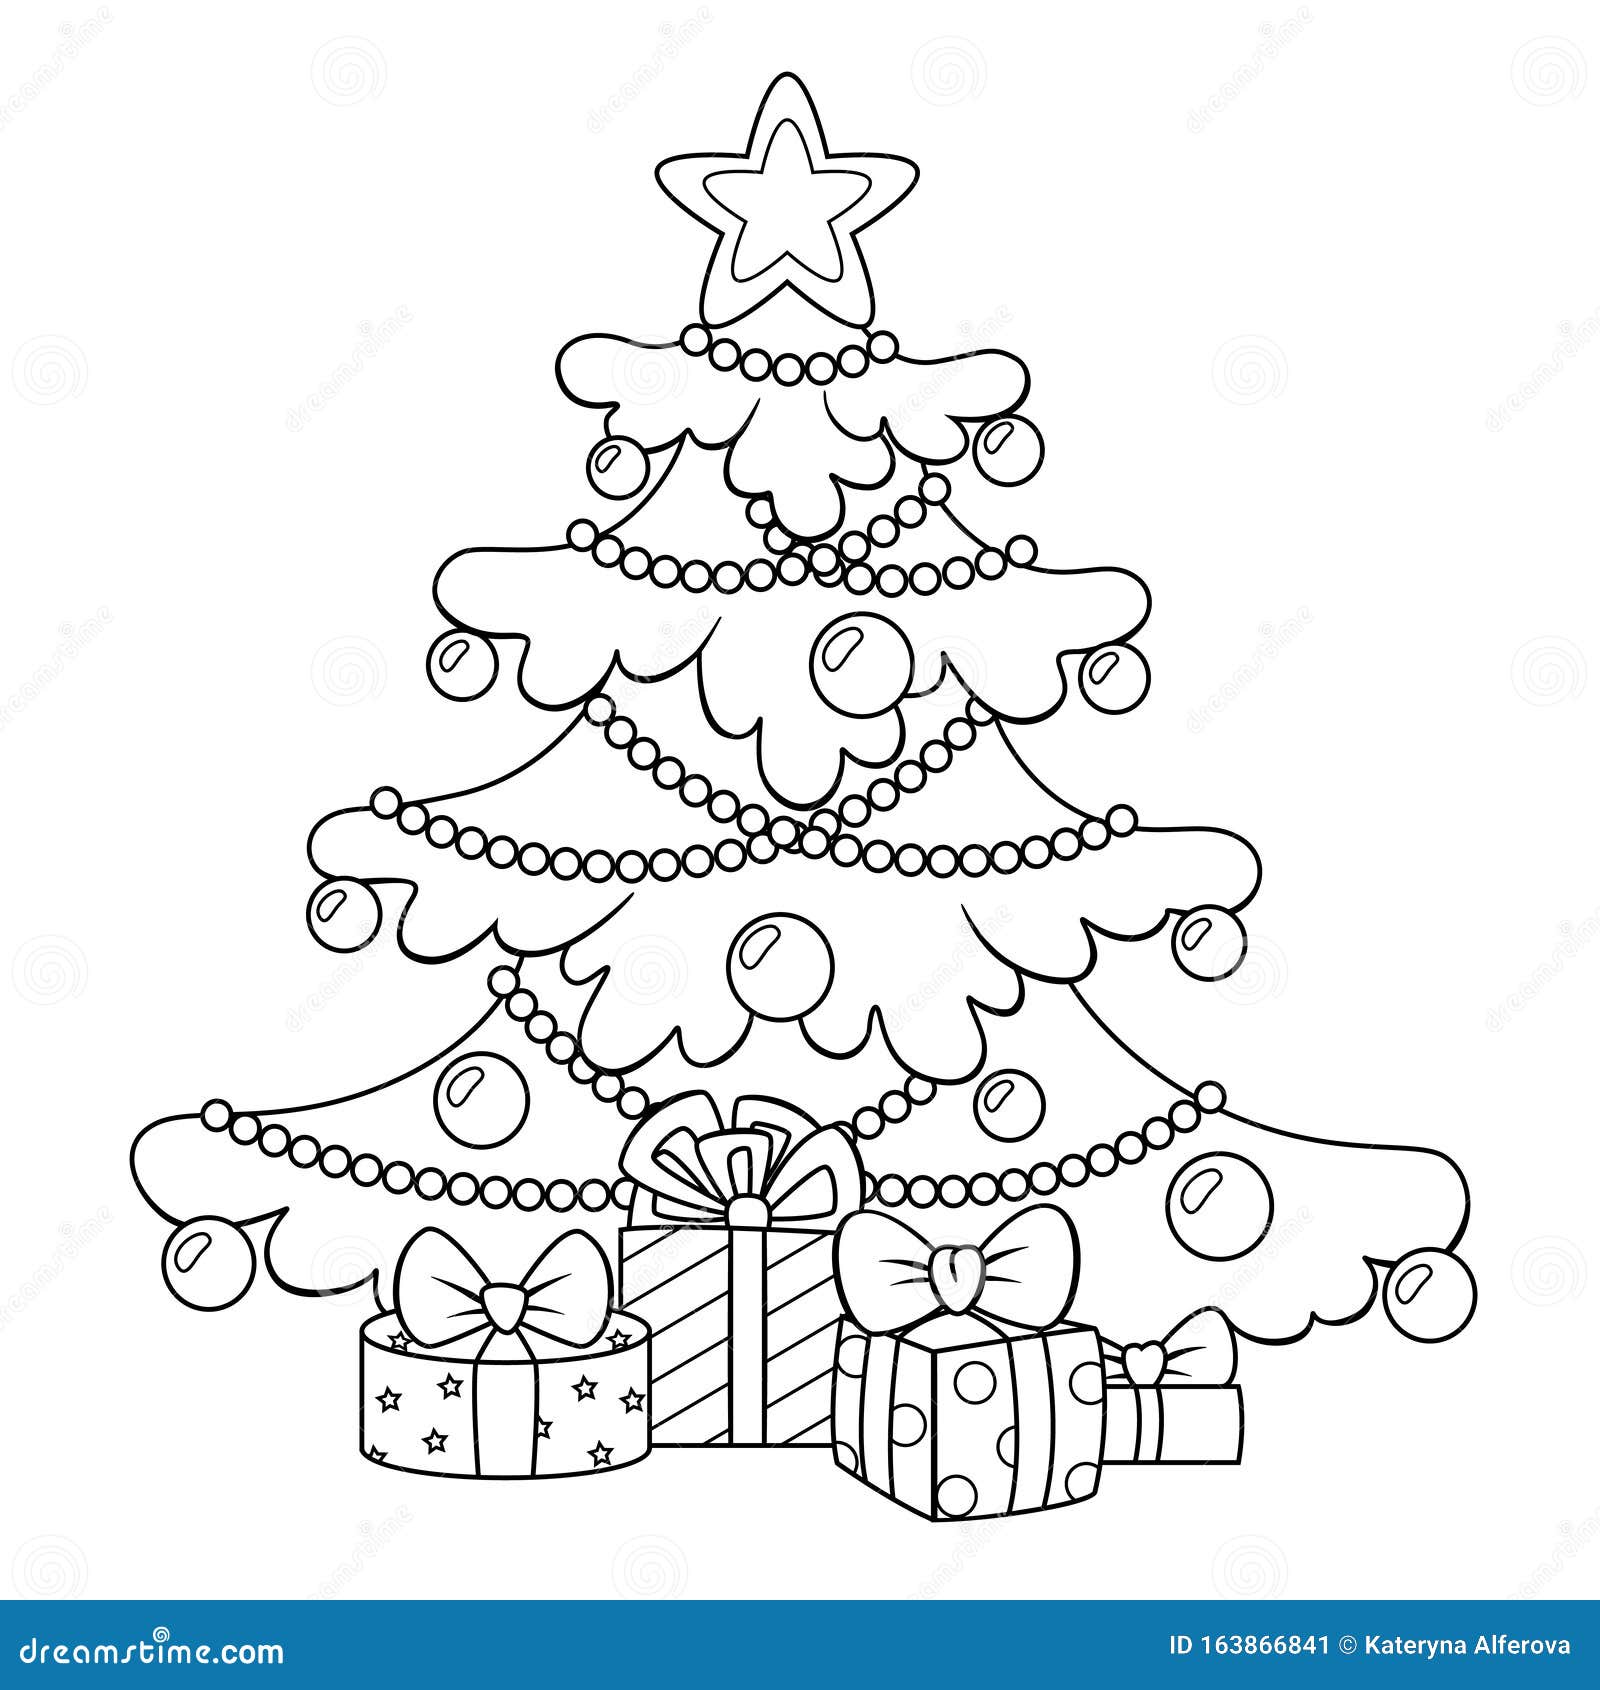 Premium AI Image  Simplicity Vector Art of a Black and White Cookie Cutter  Christmas Tree